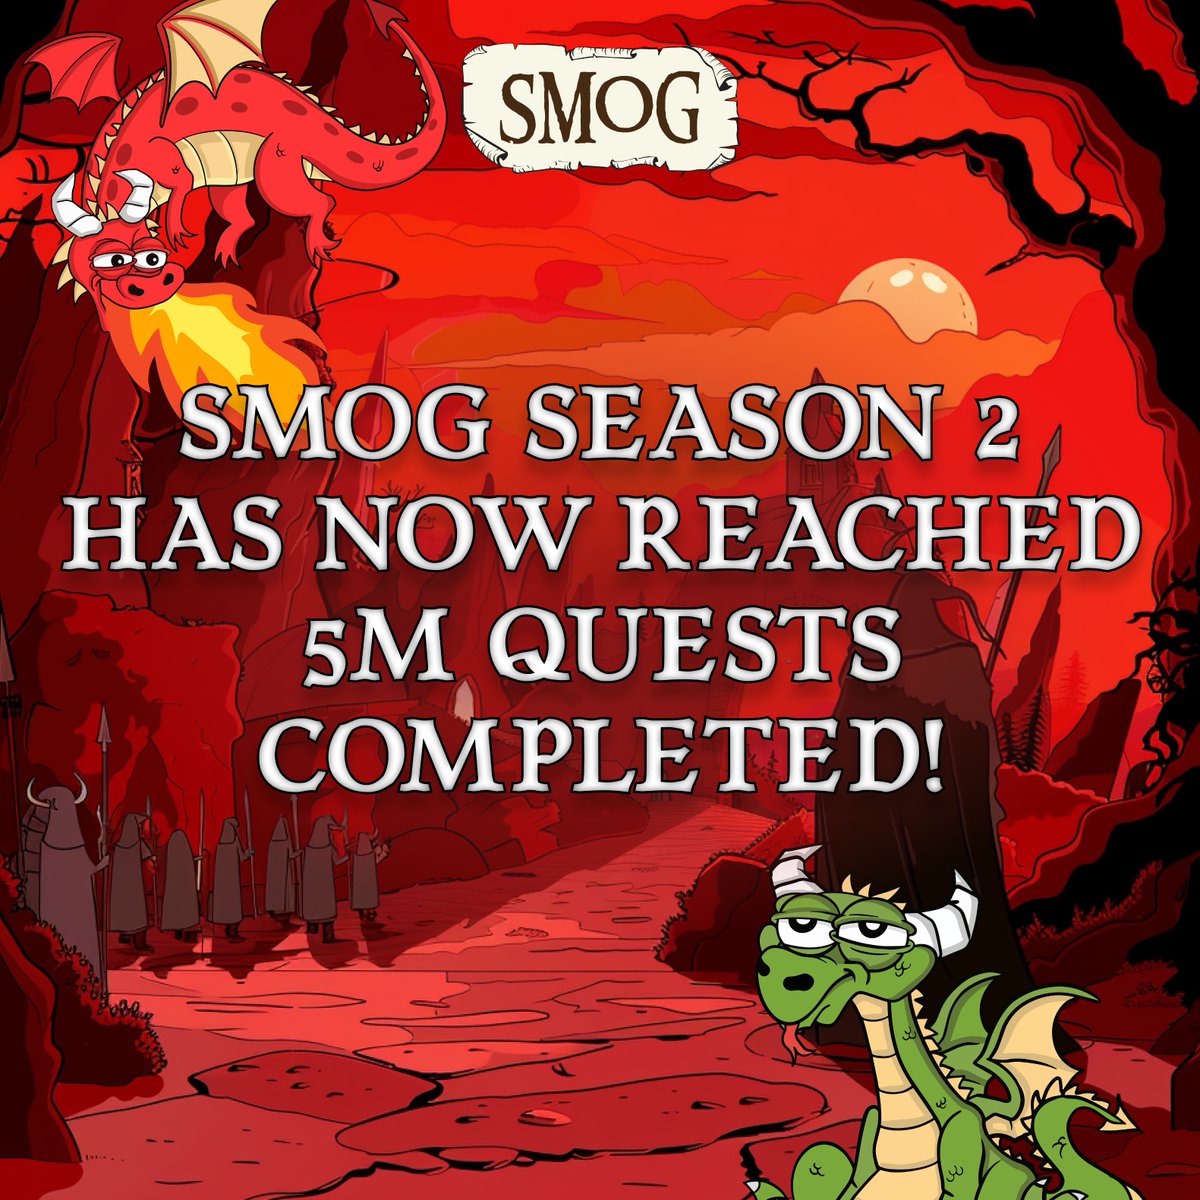 Another awesome milestone reached by our community! 🎉🐉 Over 5 Million quests completed in #SMOG Season 2! 🌟 Become a #Dragon today, trade $SMOG and climb the S2 leaderboard! 💪🔥 bit.ly/BuySmog #SmogSwap #TradeSmog #Solana #Memecoins